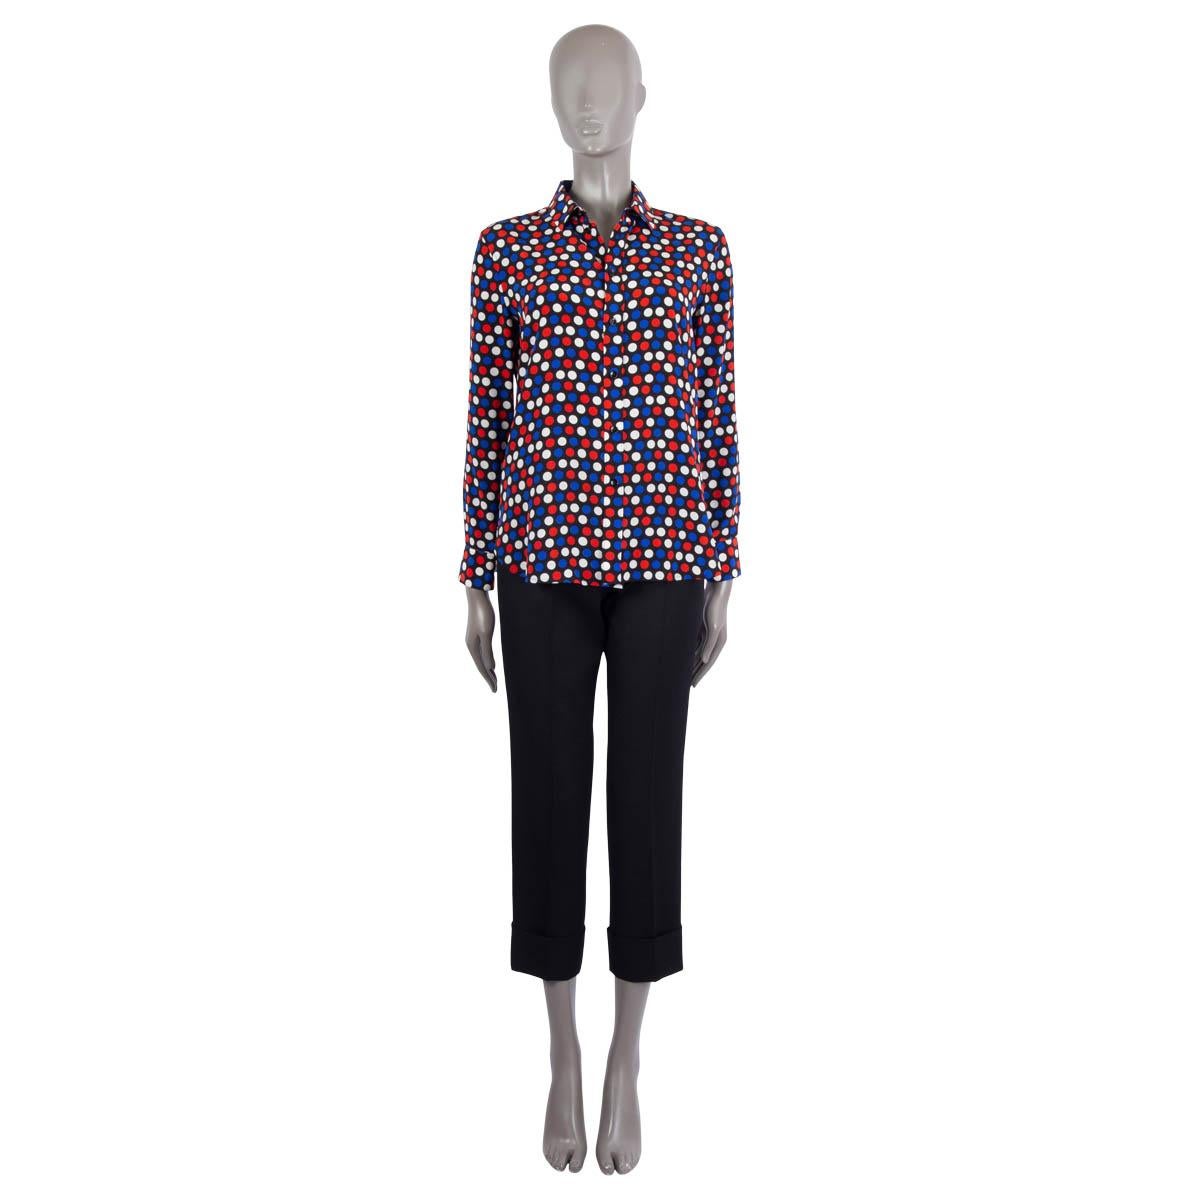 100% authentic Saint Laurent button-up shirt in black silk crepe (100%) with polka dot print in red, blue and white. Features signature Paris collar. Has been worn and is in excellent condition.

2016 Fall/Winter

Measurements
Tag